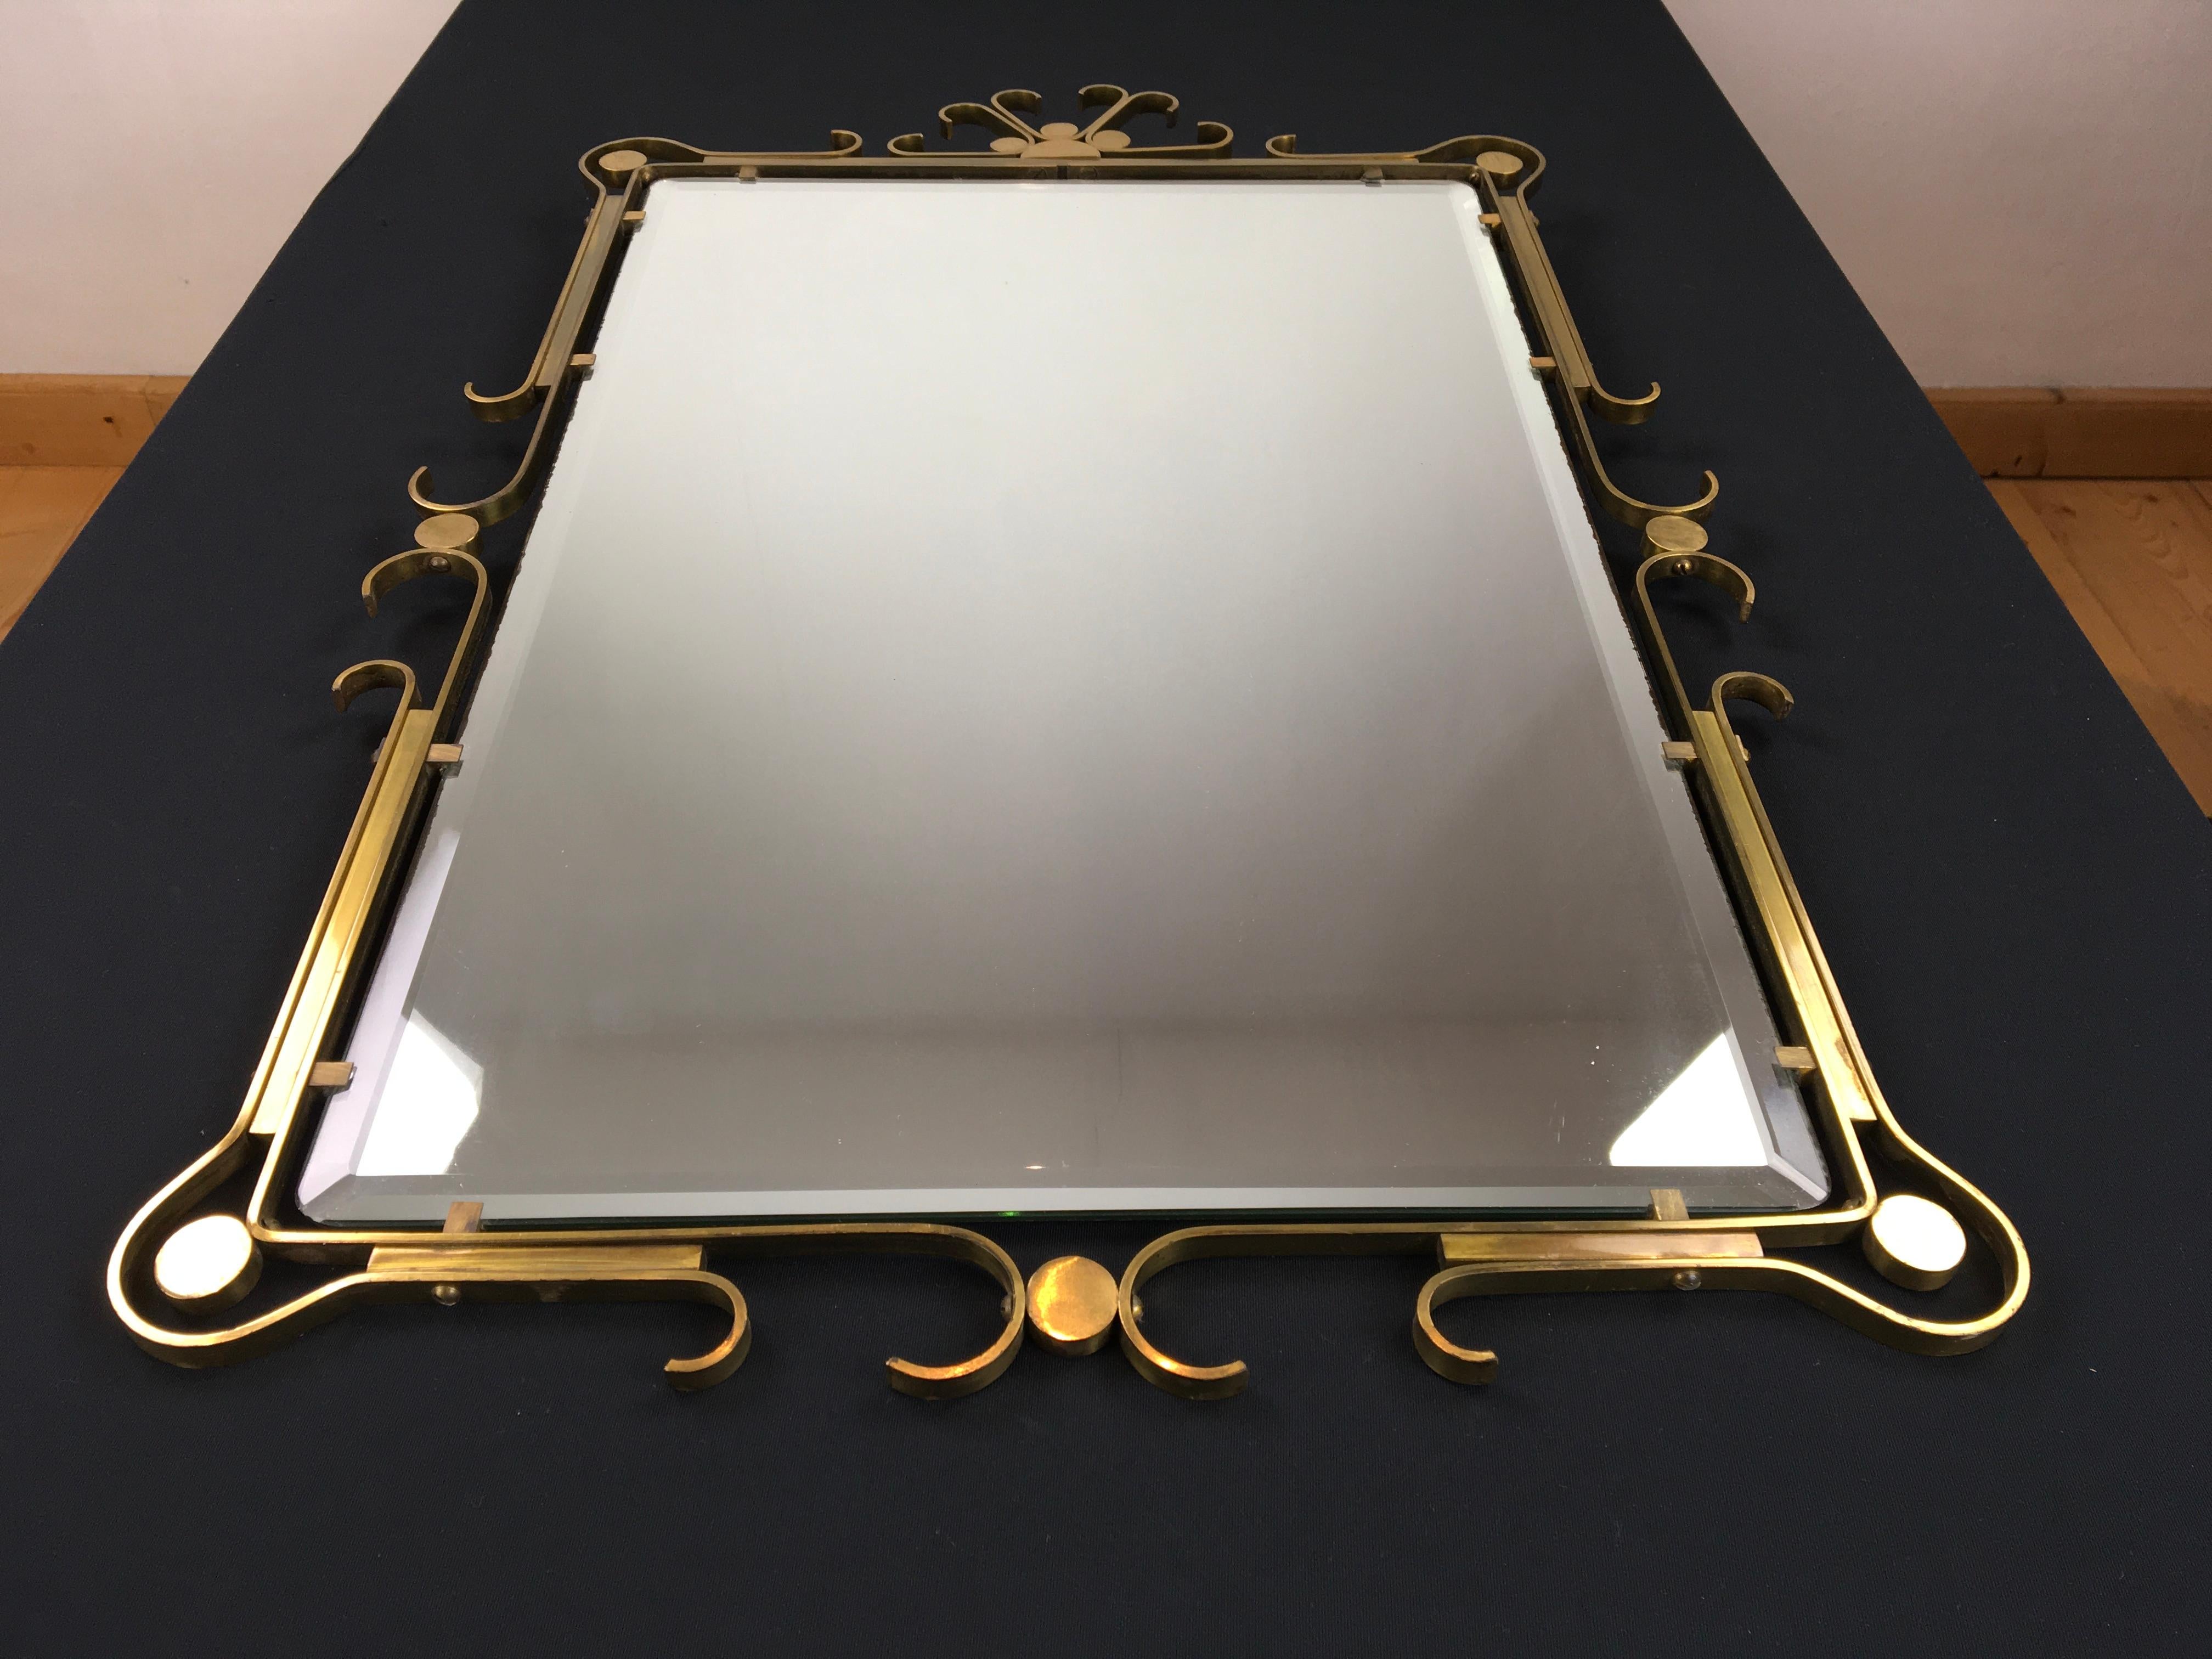 Brass wall mirror of the late Art Deco period, circa 1950s.
The brass or copper framework of this rectangular mirror has scrolled corners and is gracefully curved.
In the brass or copper frame you have the beveled mirror glass. 
The mirror glass